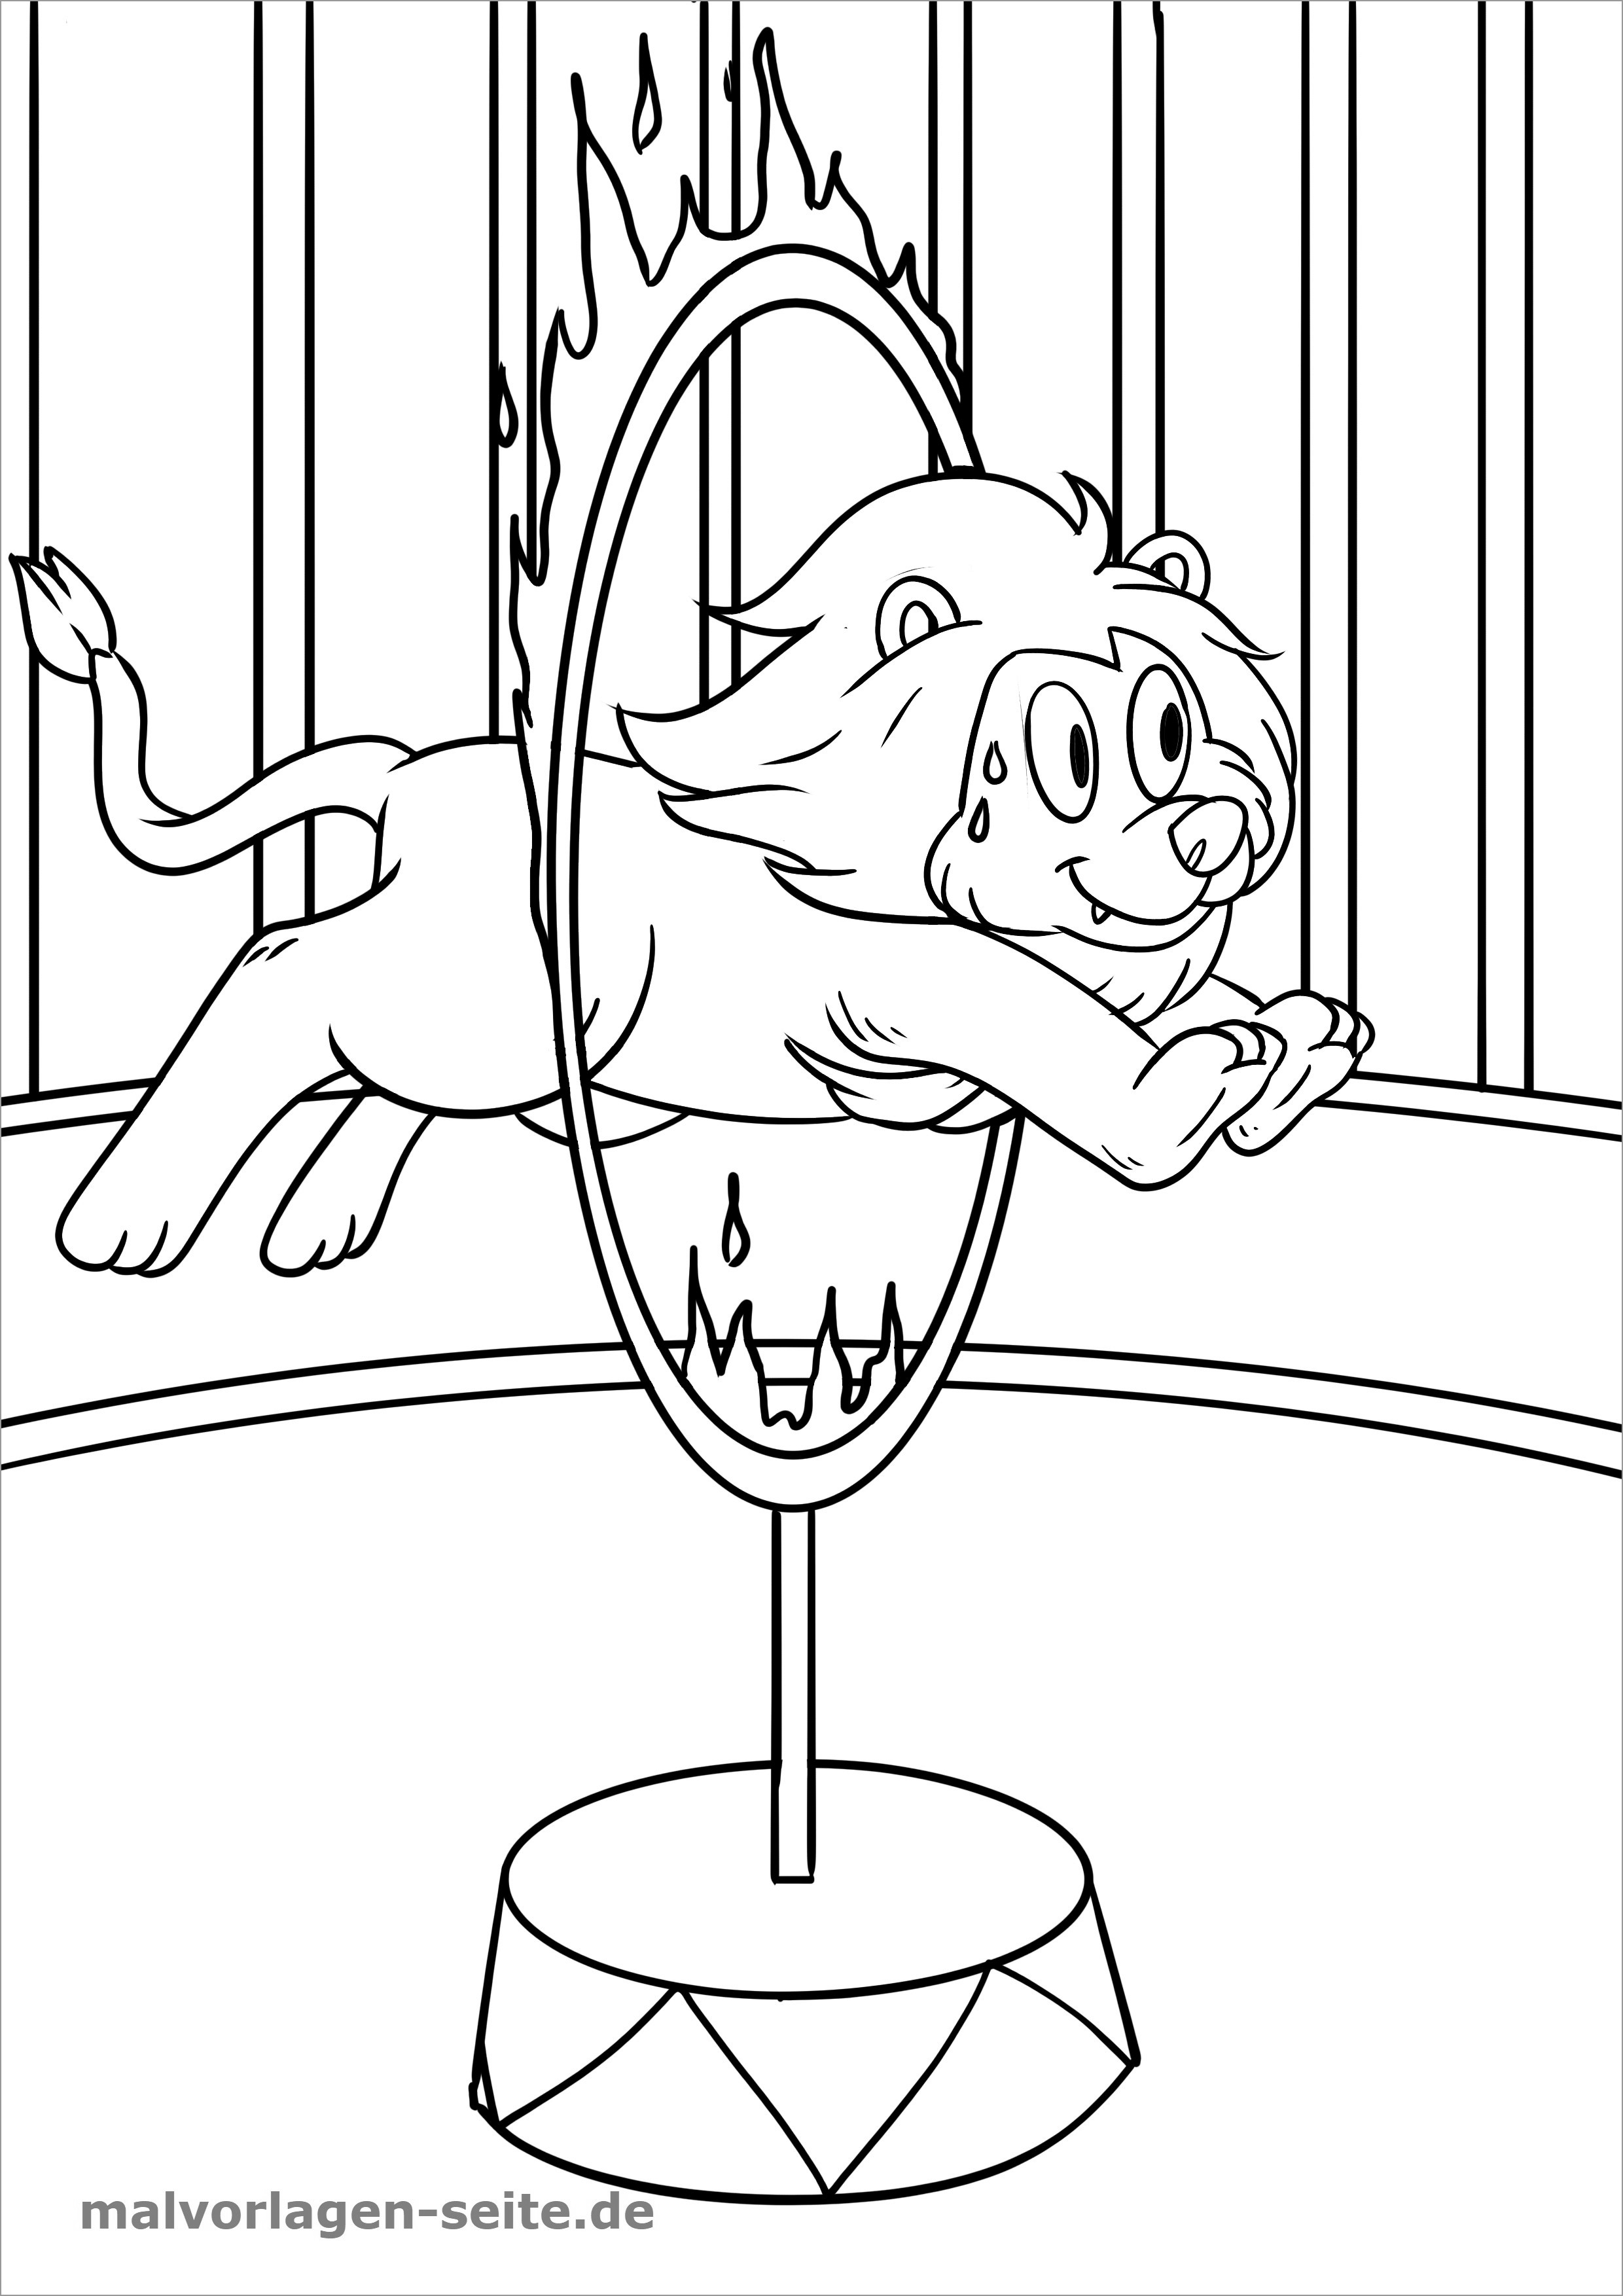 Circus Lion Coloring Pages - Coloring Pages Circus Lion Free Page 7